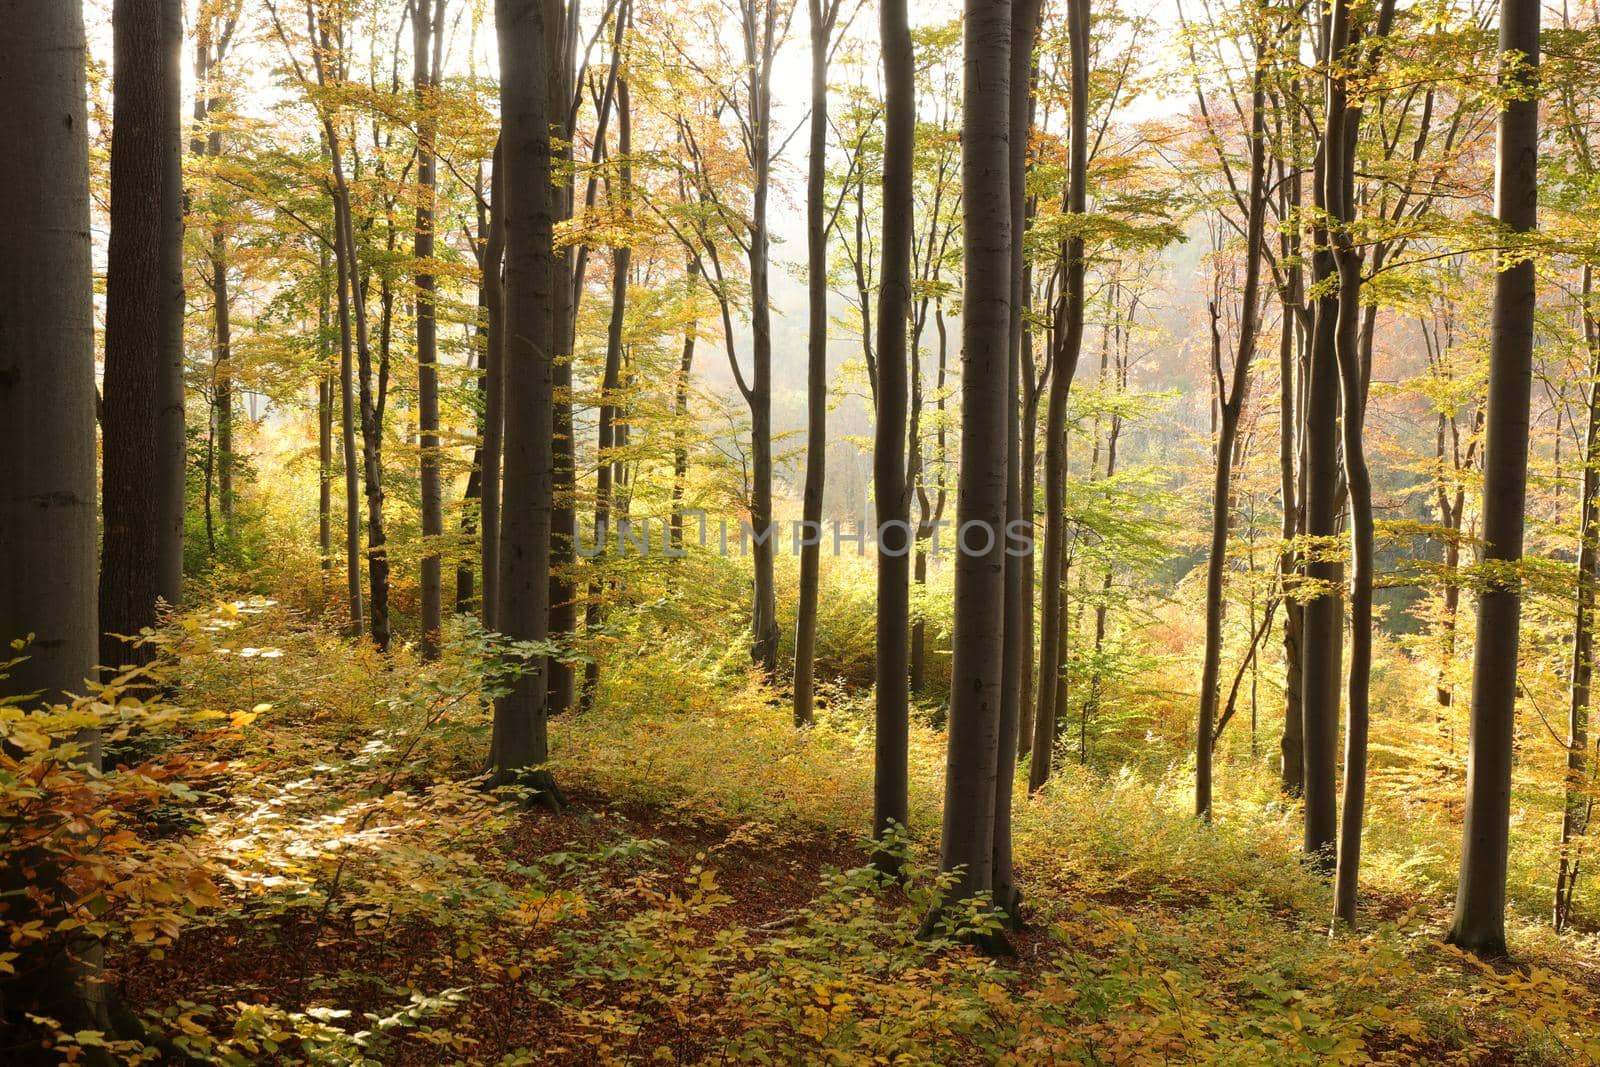 Autumn beech forest on the mountain slope during sunset.